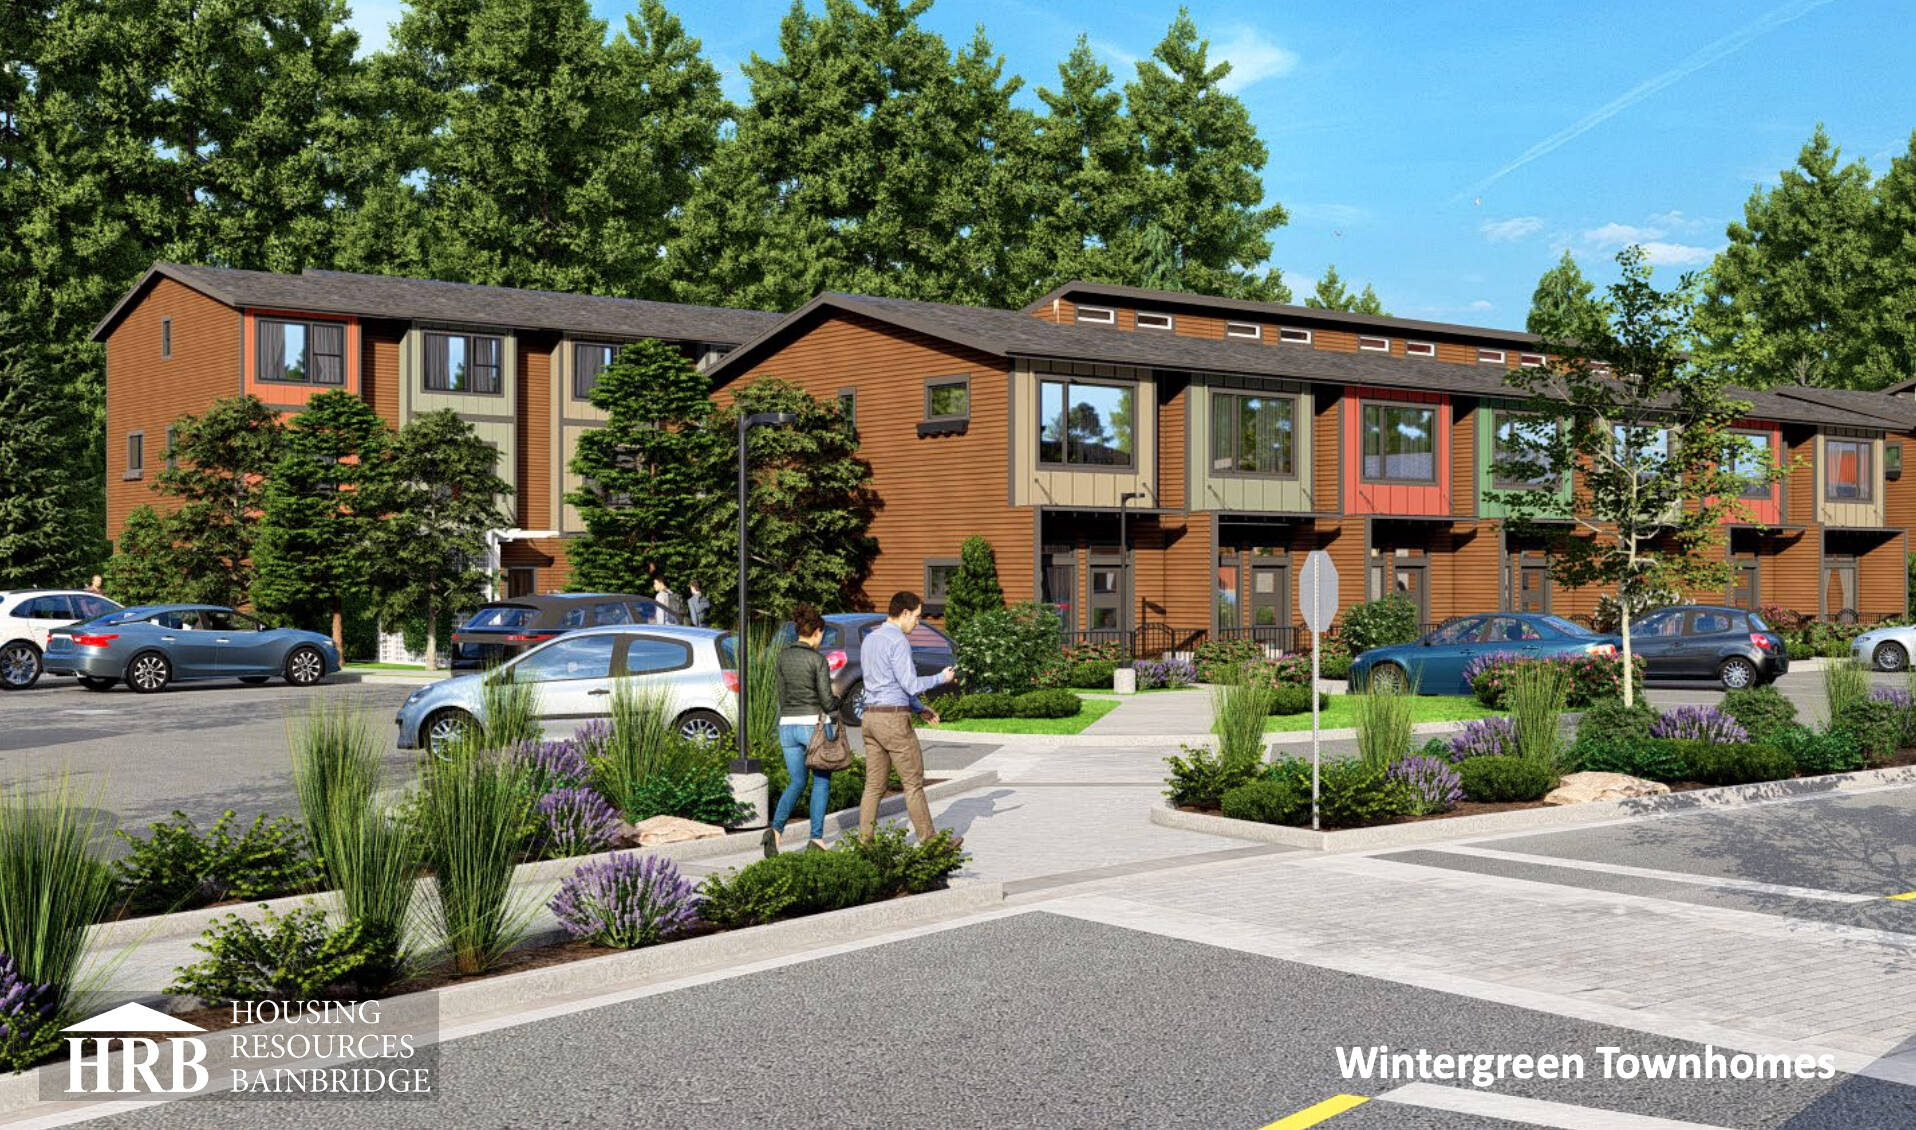 Rendering of the Wintergreen Townhomes located between Virginia Mason Clinic and Walgreens. Courtesy Image